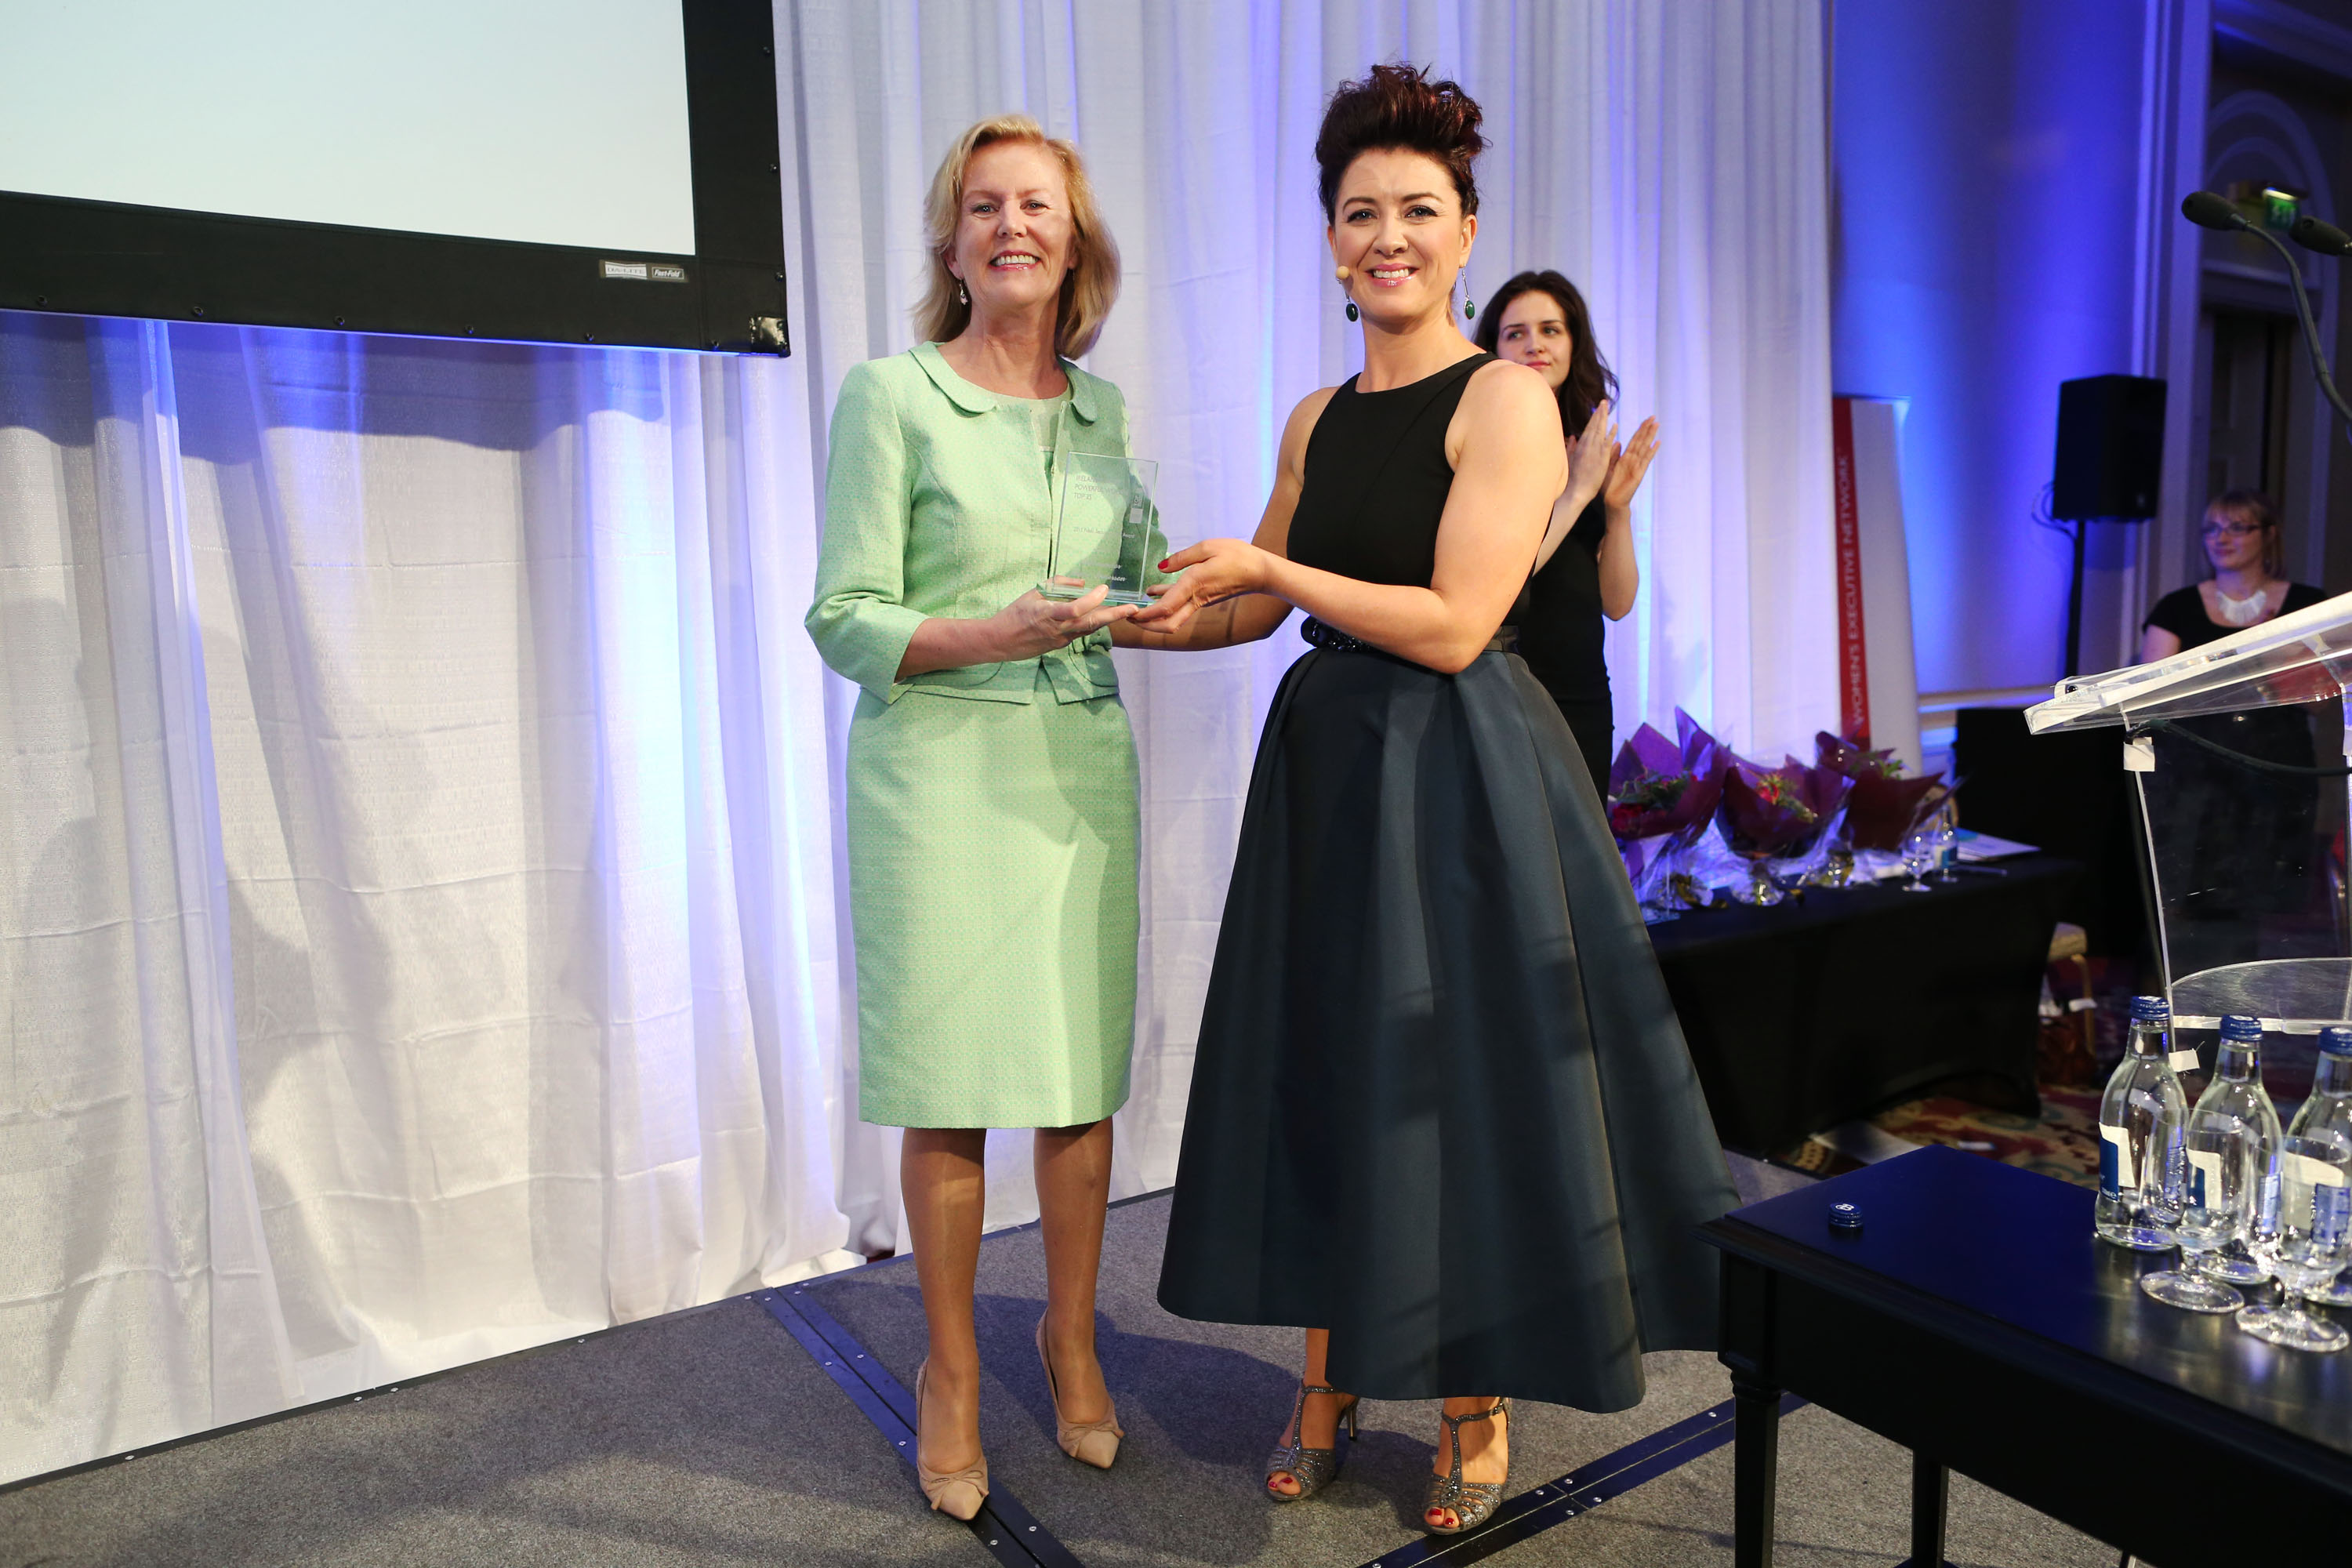 Anne Anderson with Roisin O'Hara, broadcast Journalist. Click to enlarge.